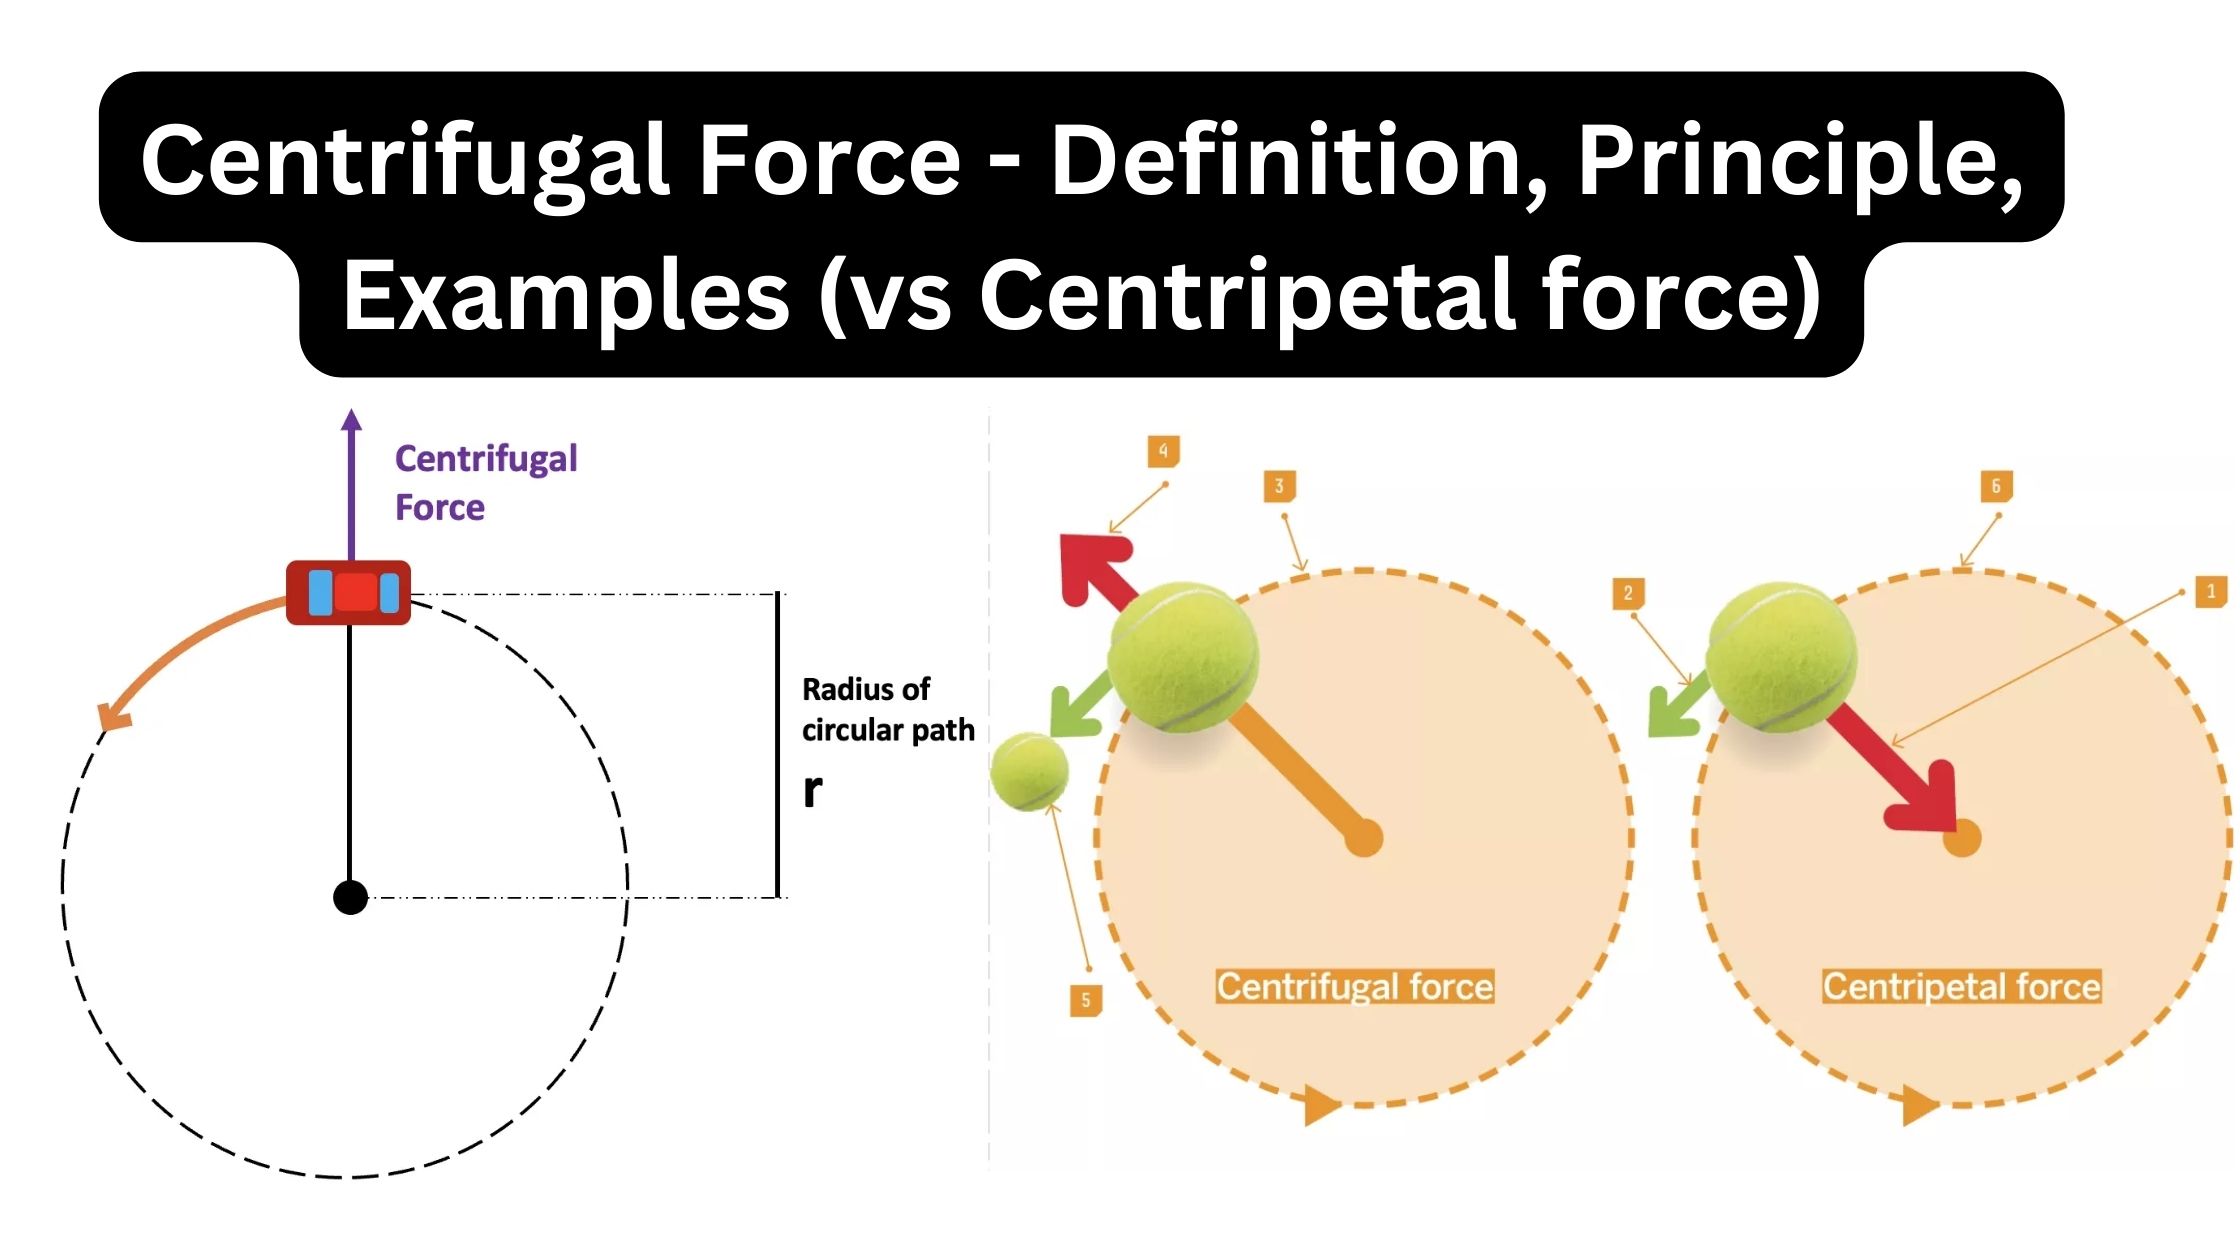 Centrifugal Force - Definition, Principle, Examples (vs Centripetal force)